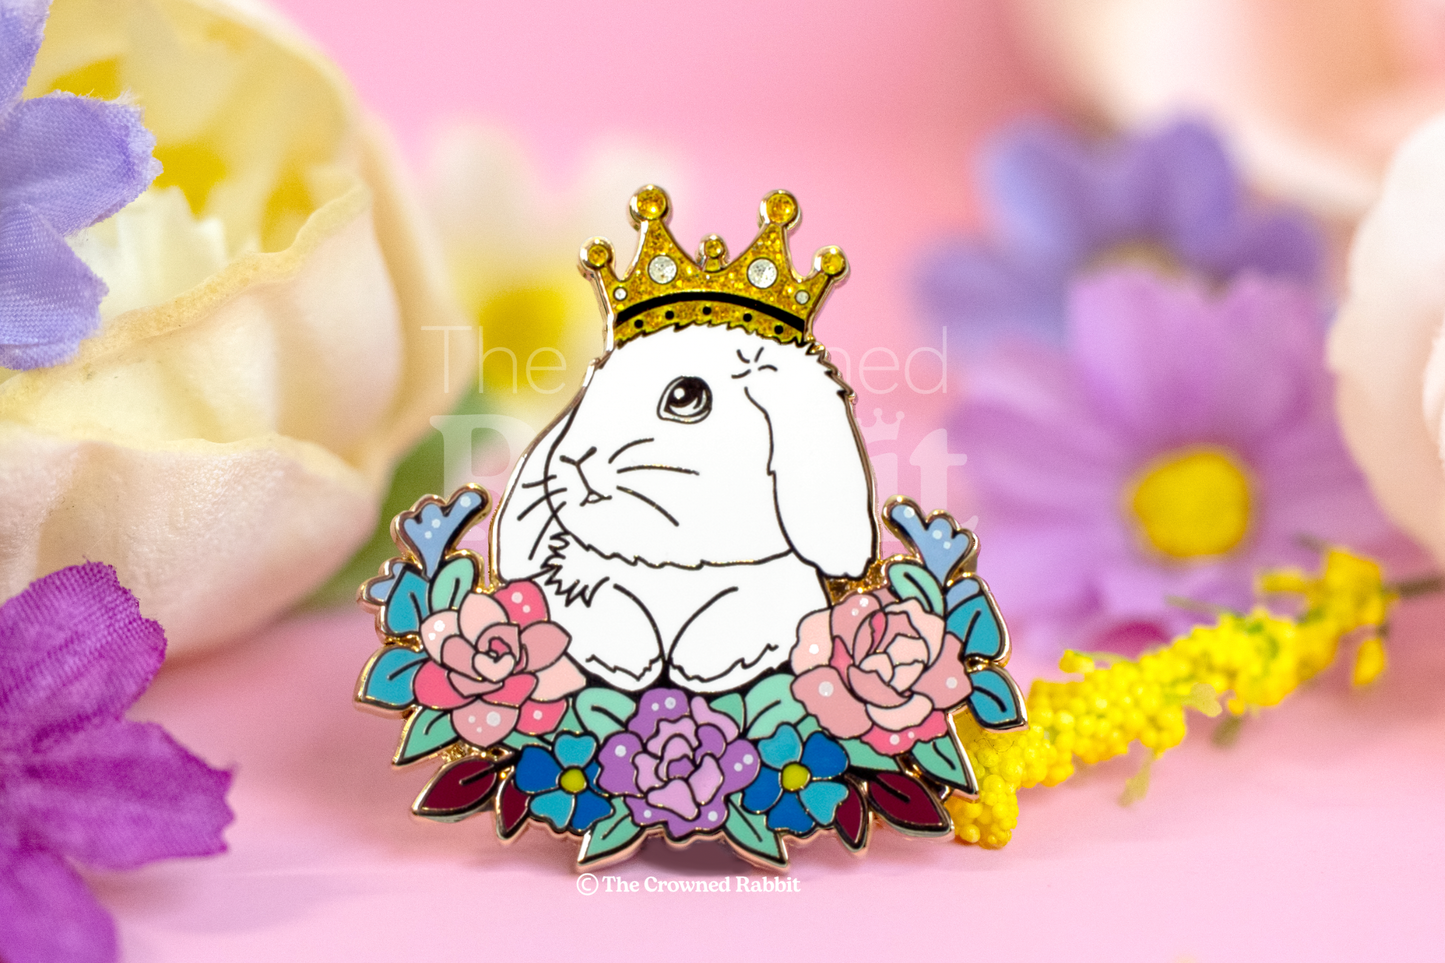 Crowned Rabbit Enamel Pin expected mid August - reserve now!